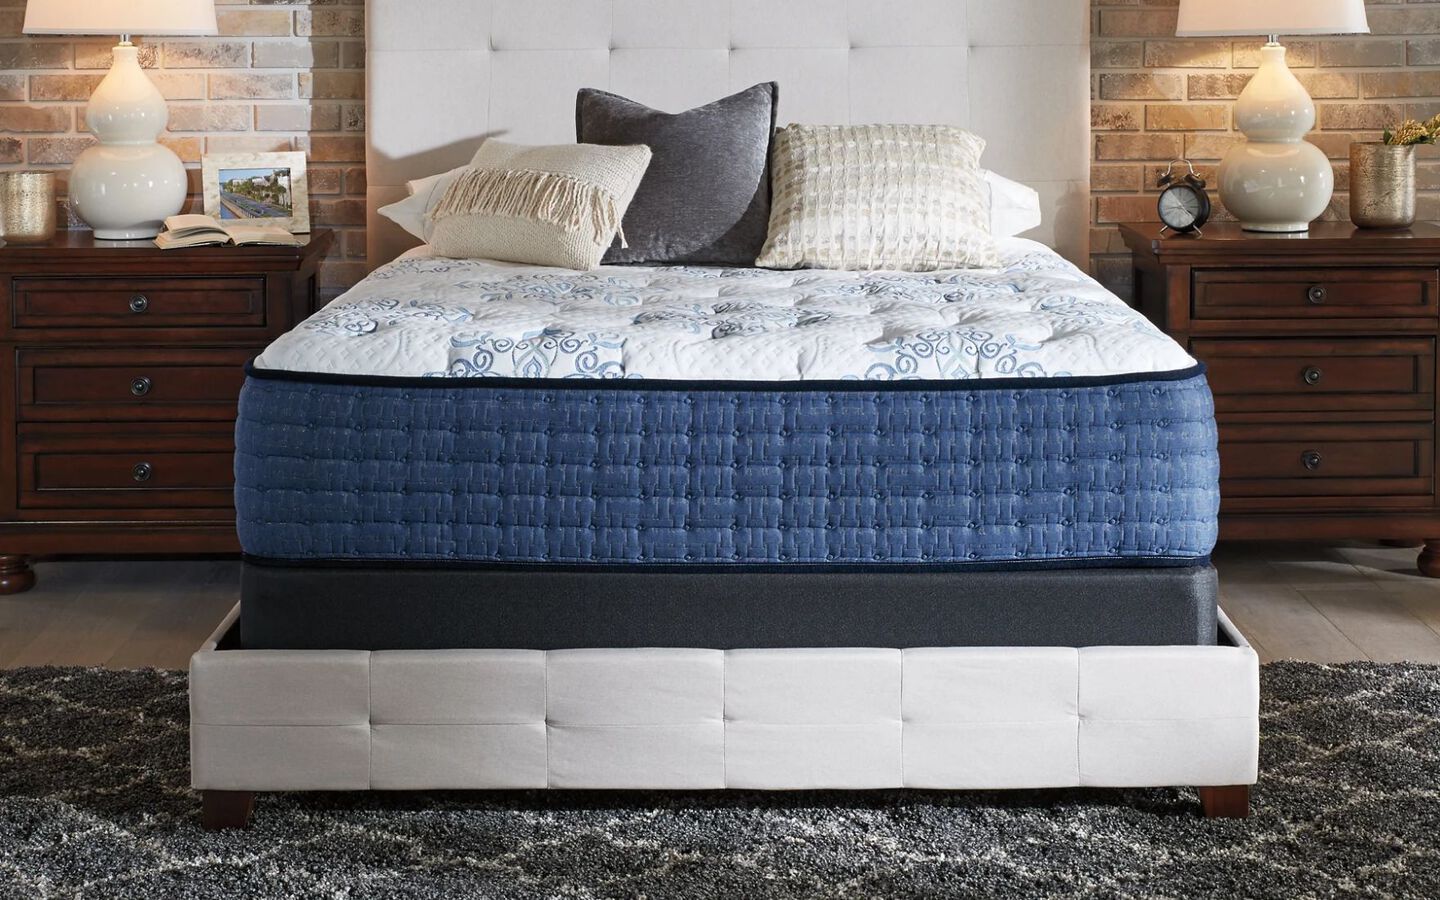 Blue and white mattress on top of a white bedframe in a bedroom